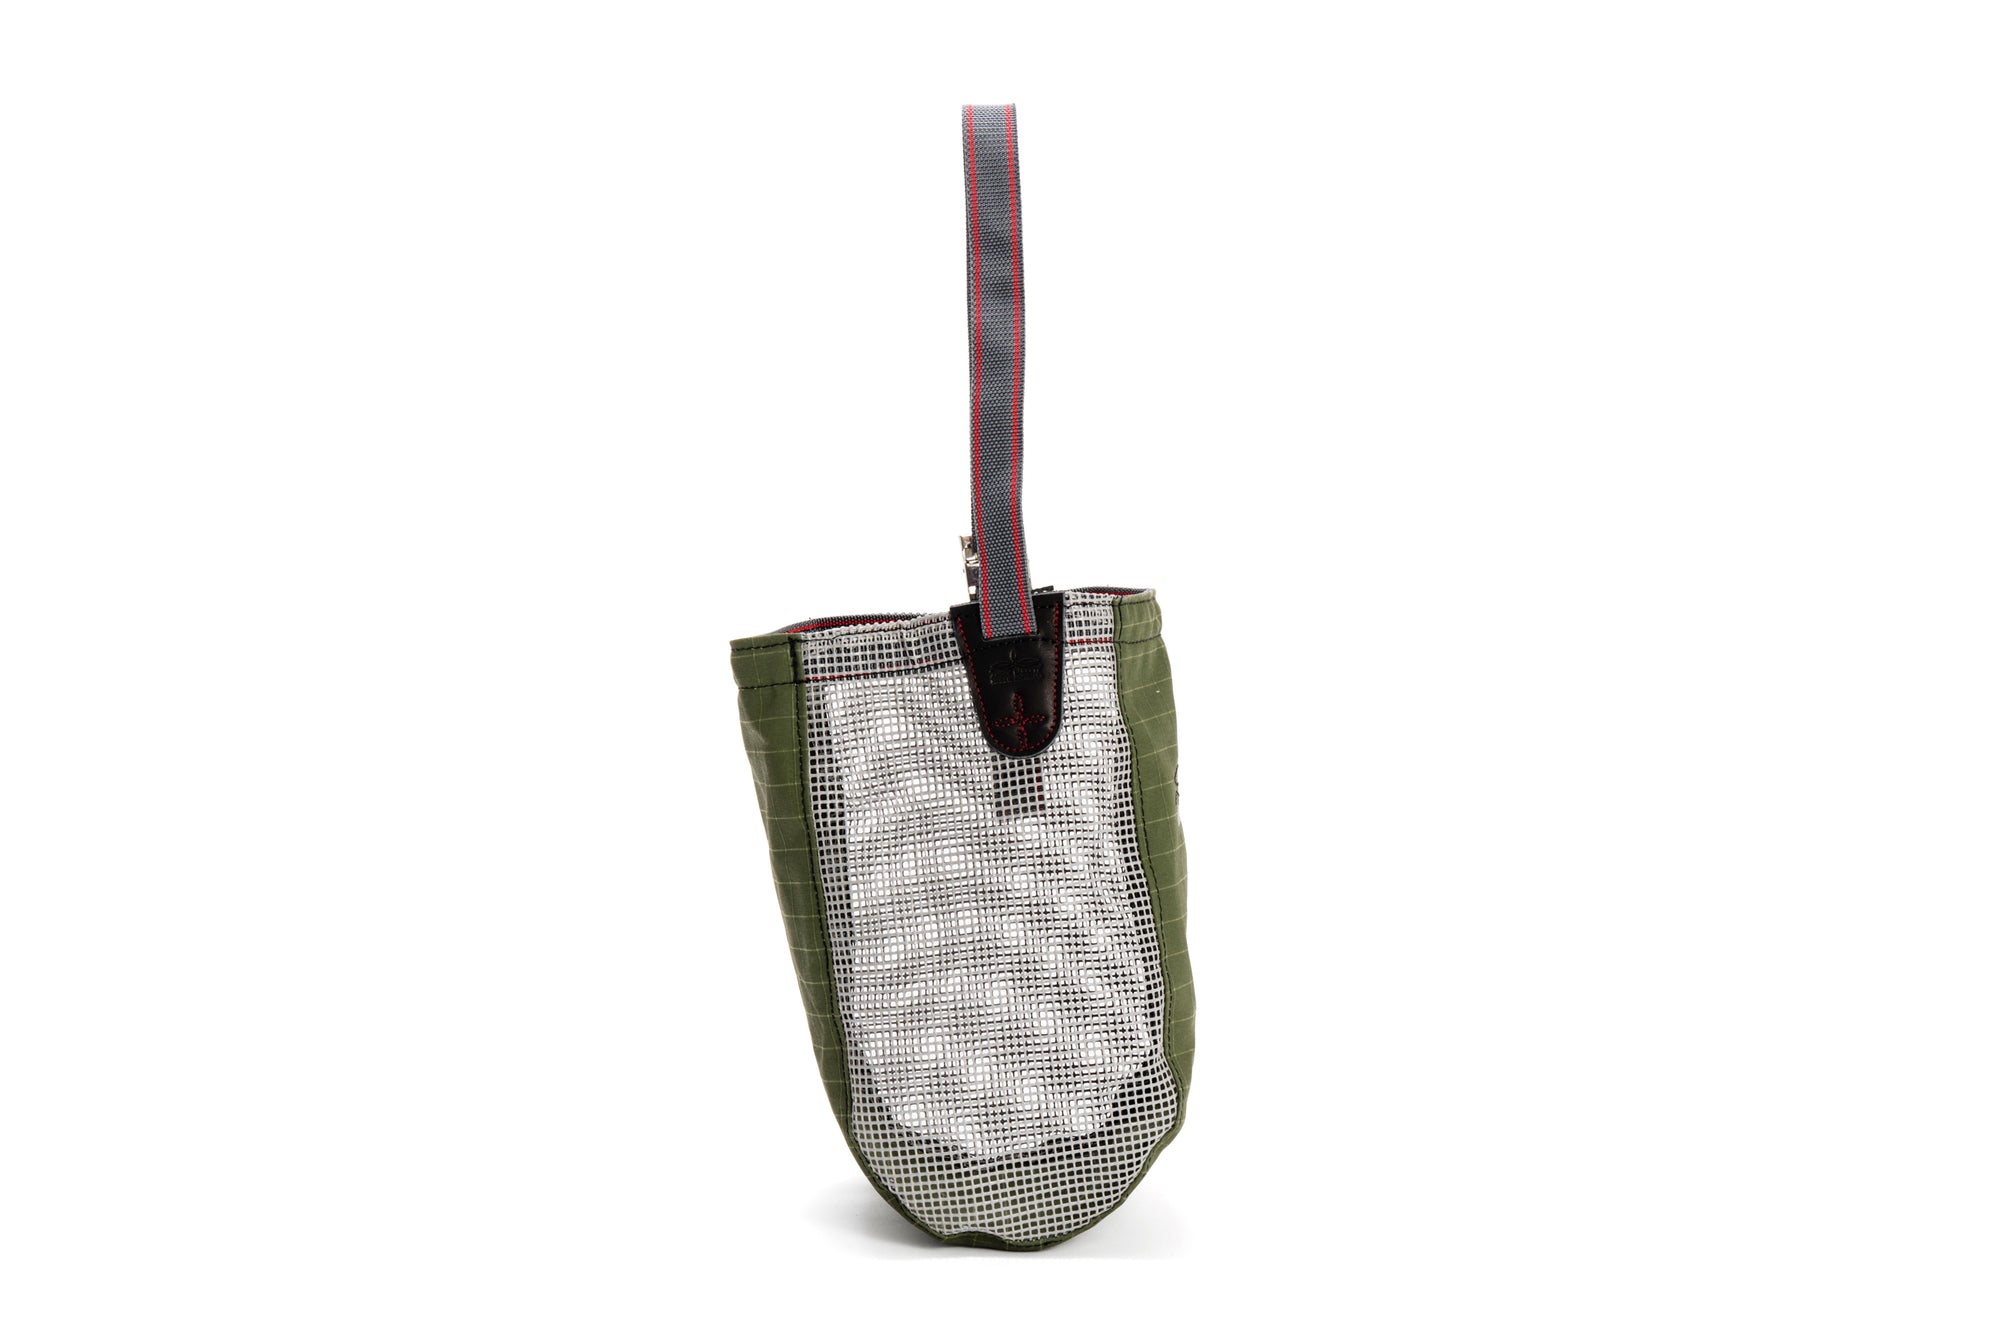 Angus Barrett Nose Bag - Ripstop Canvas with PVC mesh